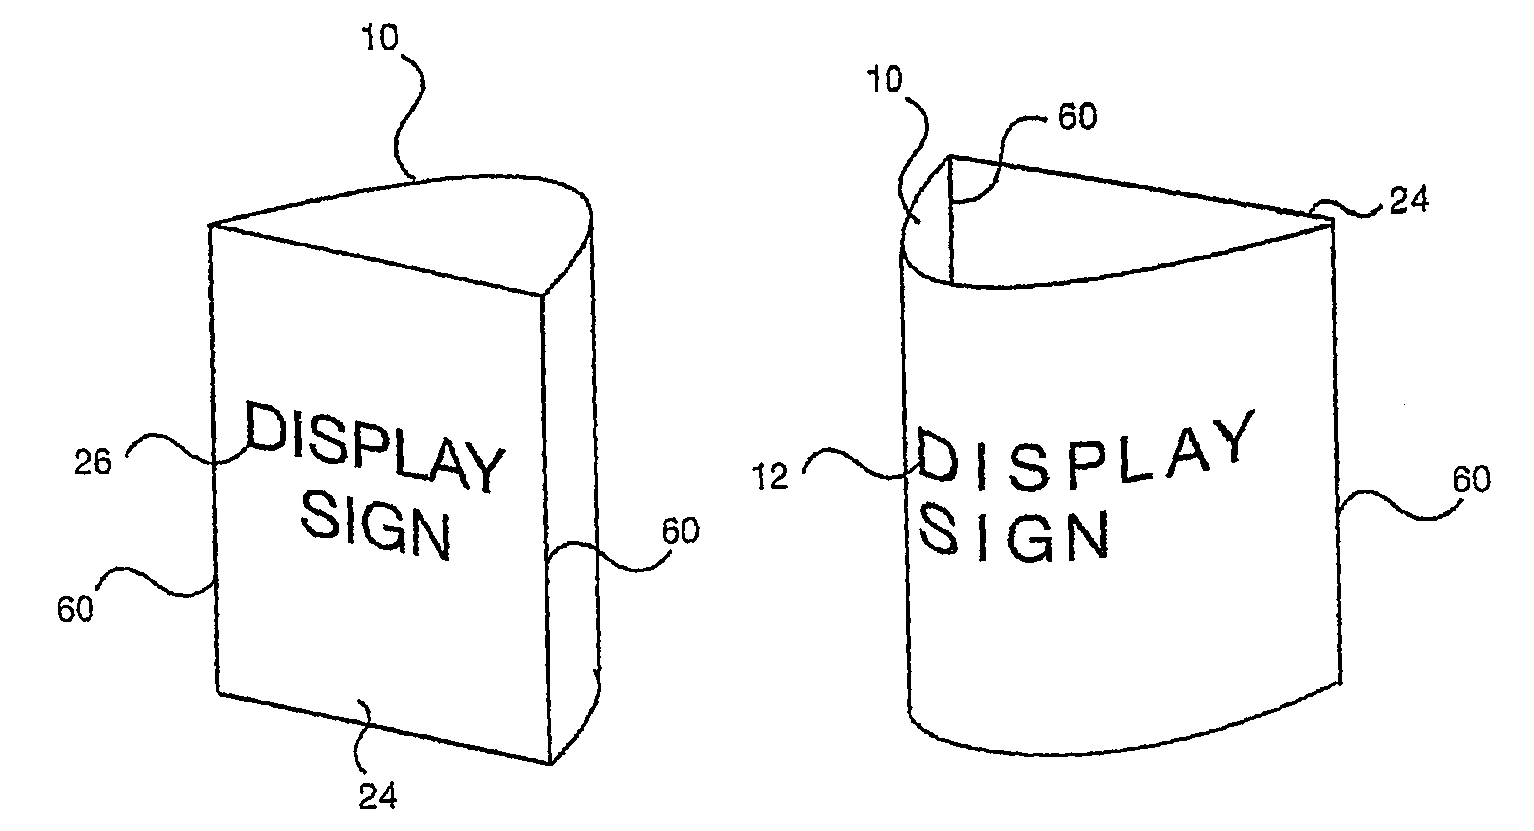 Structural assembly with a tied, flexurally deformed panel